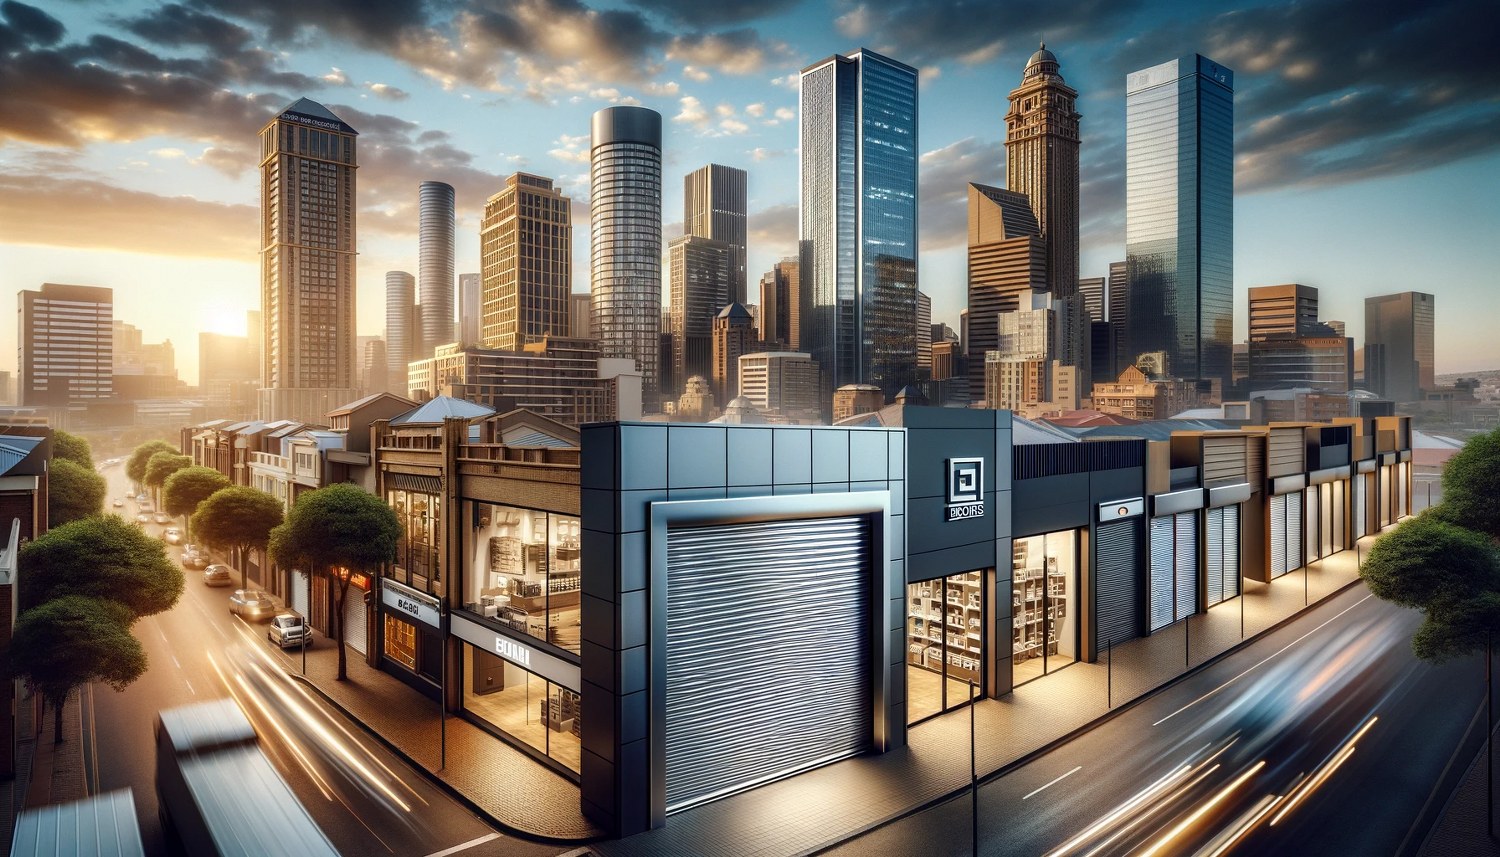 Johannesburg cityscape at sunset with modern buildings and roller shutter doors featuring the Empire Doors logo, symbolizing security and style in urban South Africa.